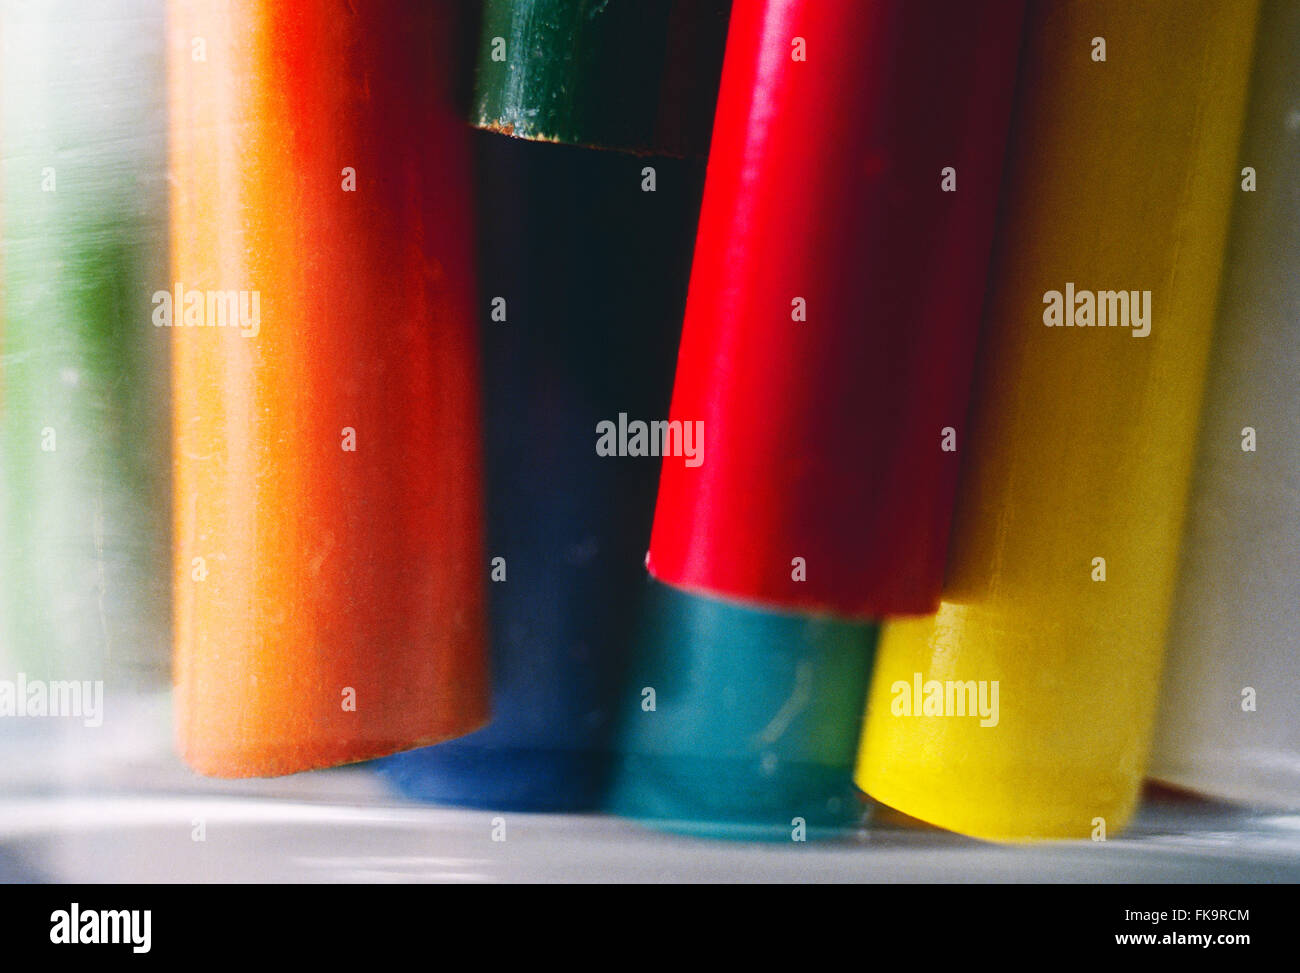 Close-up of colorful drawing pencils in a glass jar Stock Photo